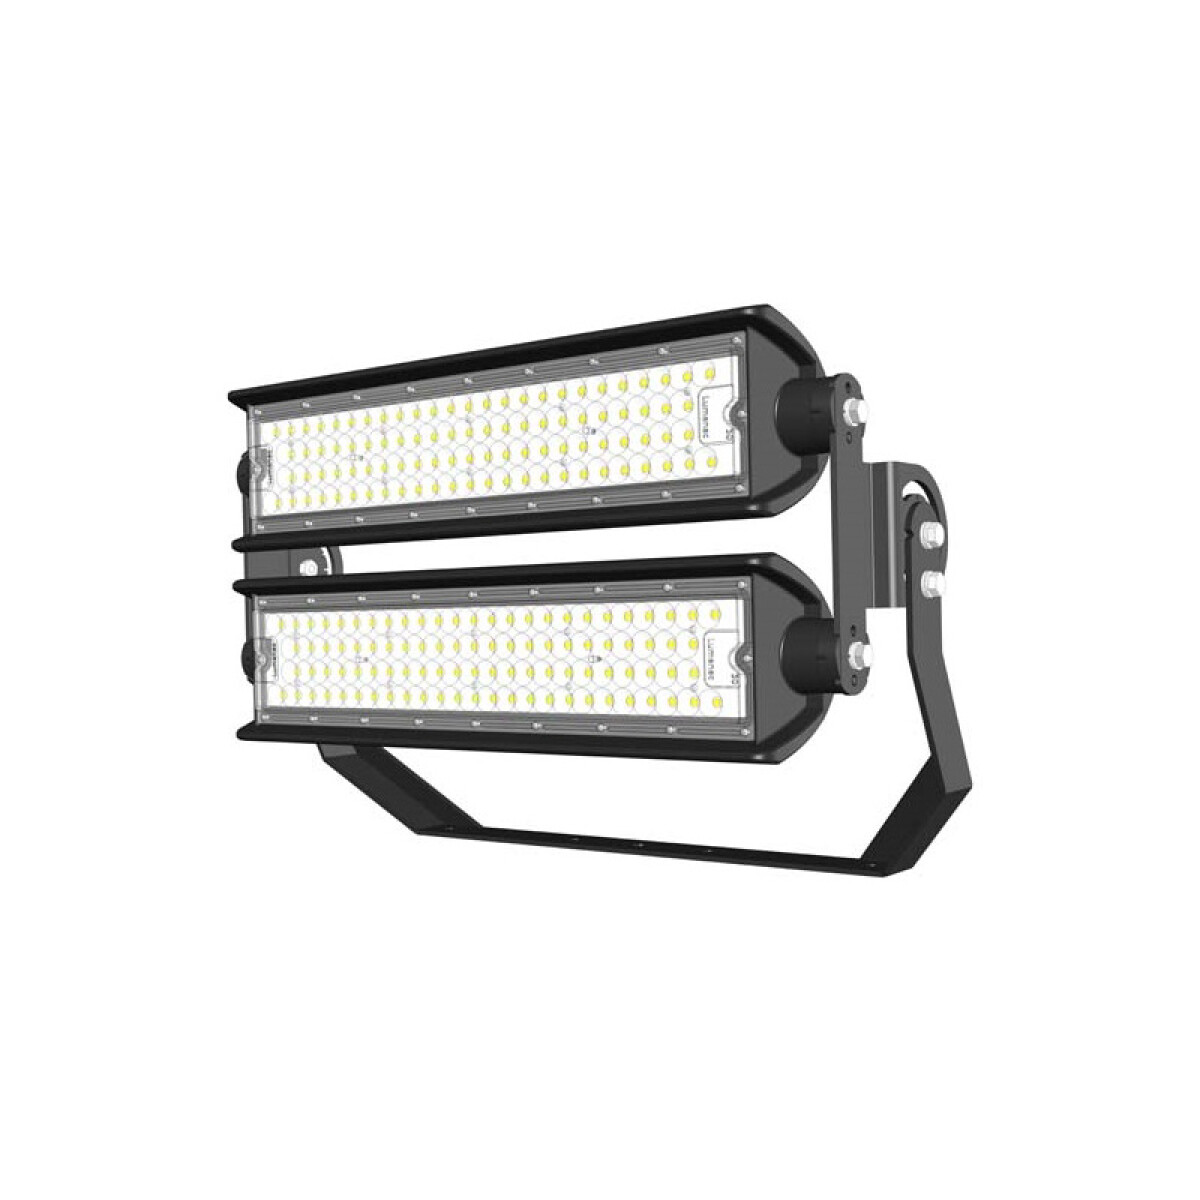 Proyector STADIUM LED ext. 500W 72500Lm fría 20° - AS3252 